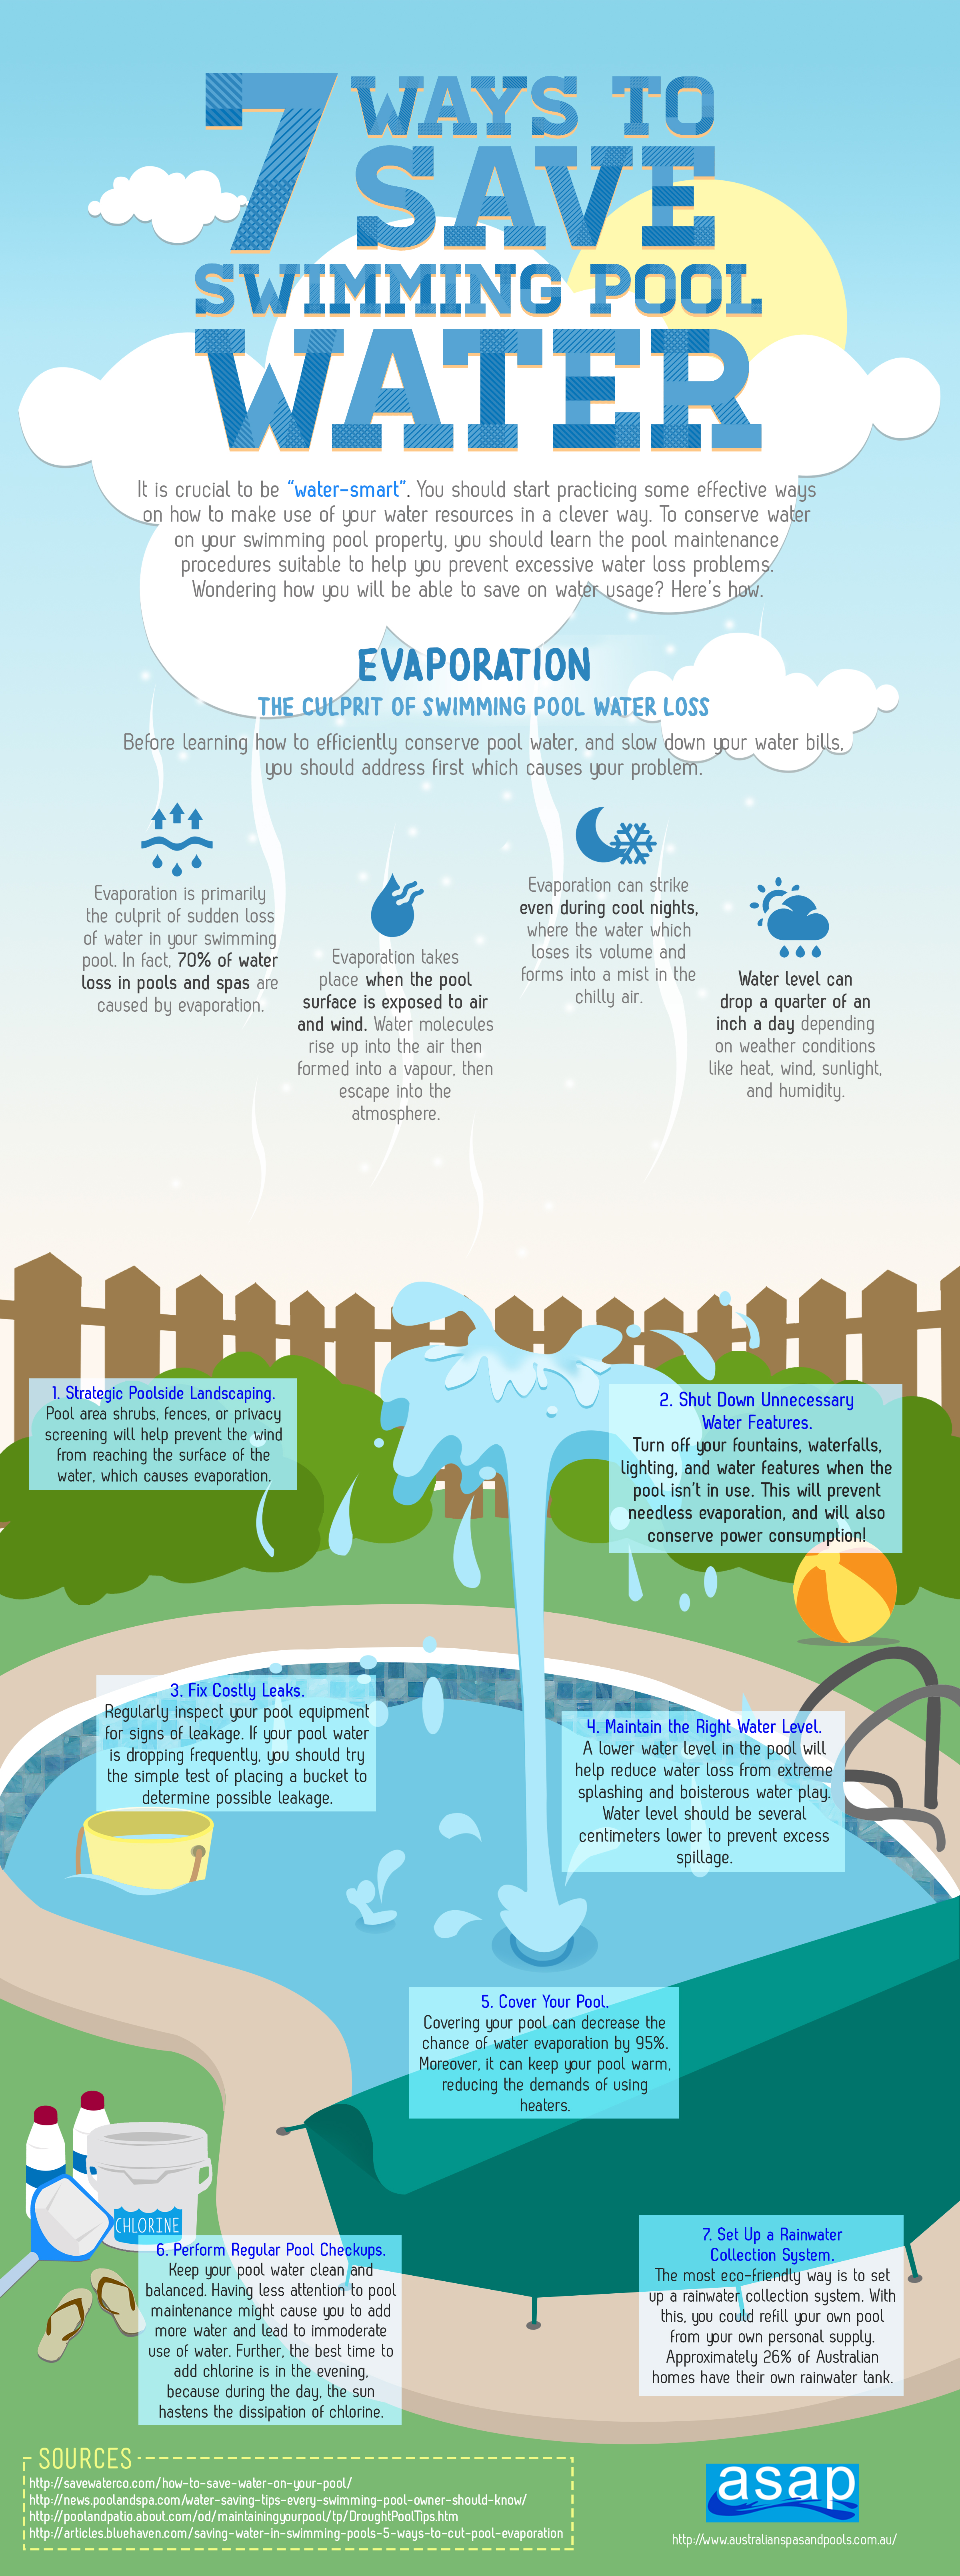 7 Ways to Save Swimming Pool Water by asap